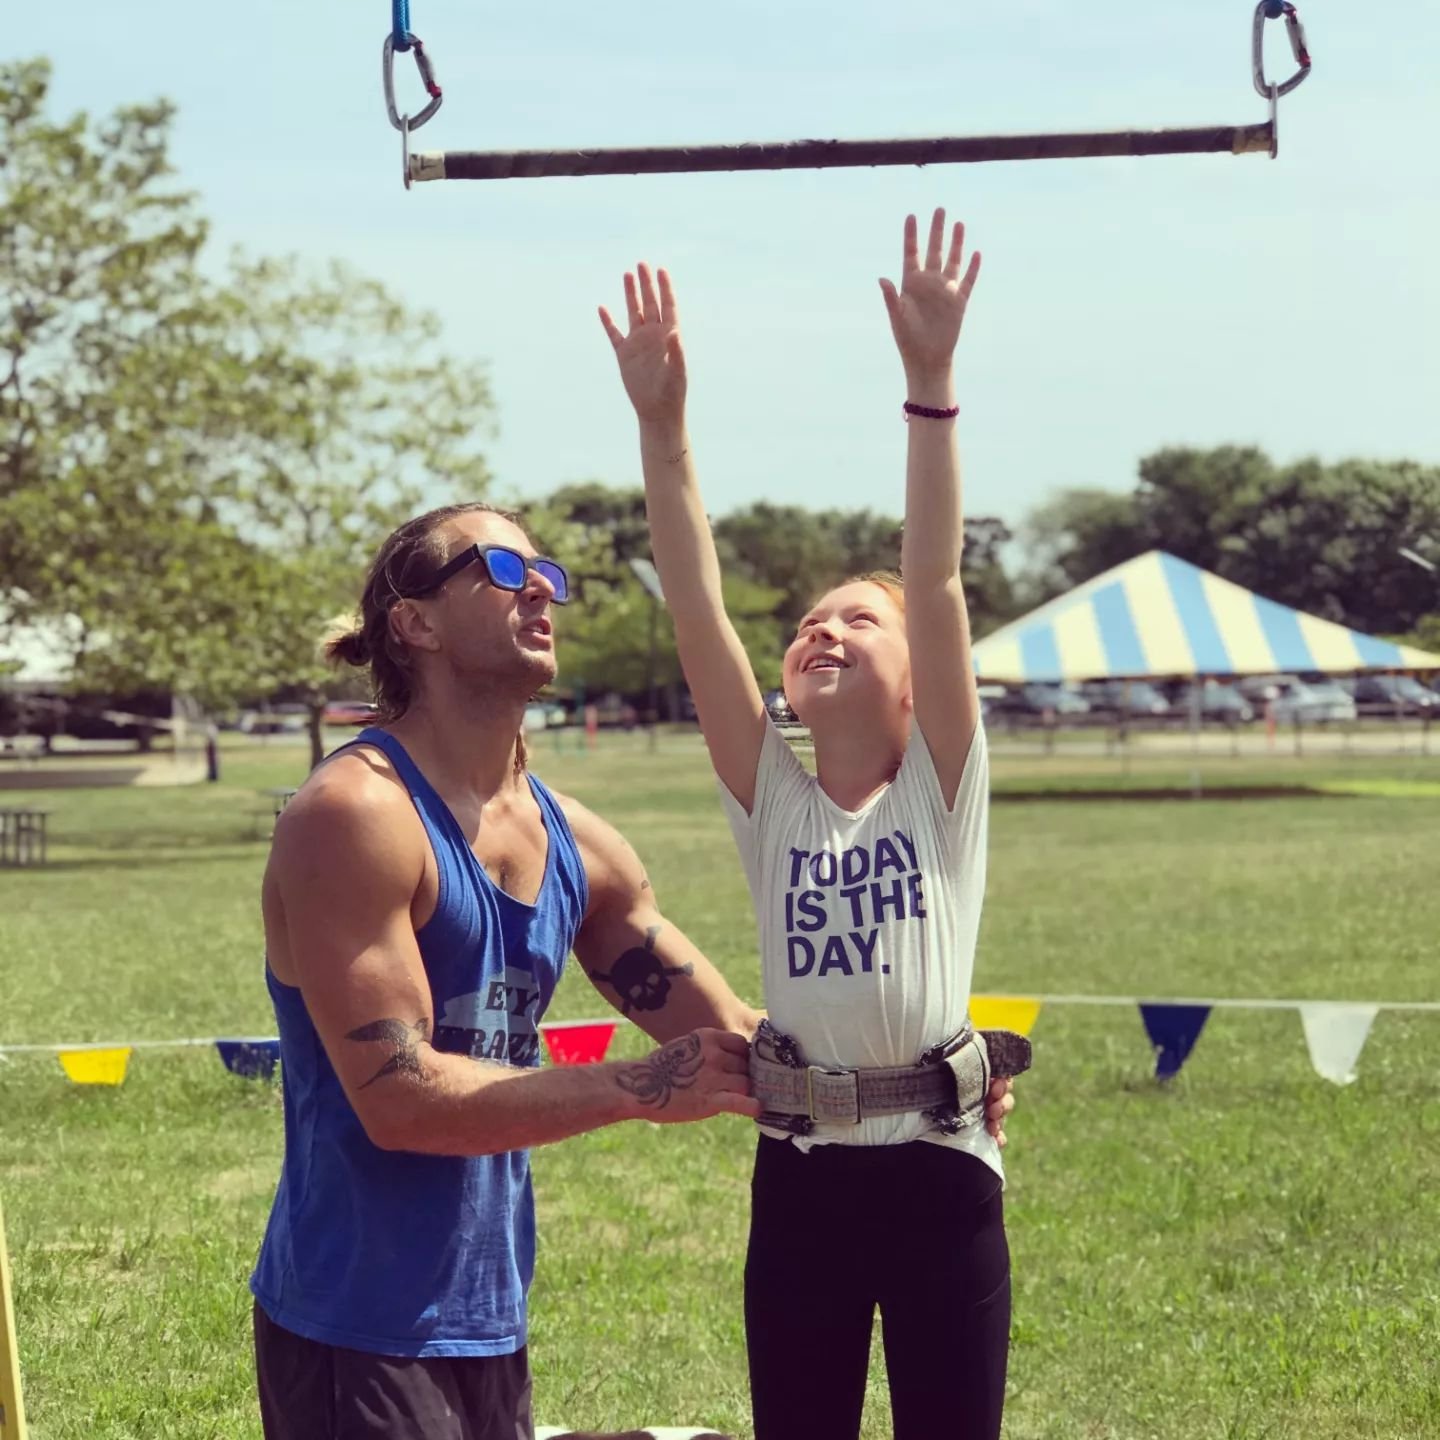 Today is the day you can learn to fly! Join us on the #trapeze and experience the greatest thrill of your #summer 🎪
.
.
.
.
.
And there are just a few spaces left in our August workshop, so sign up now and see how much you can learn!

#bridgehampton